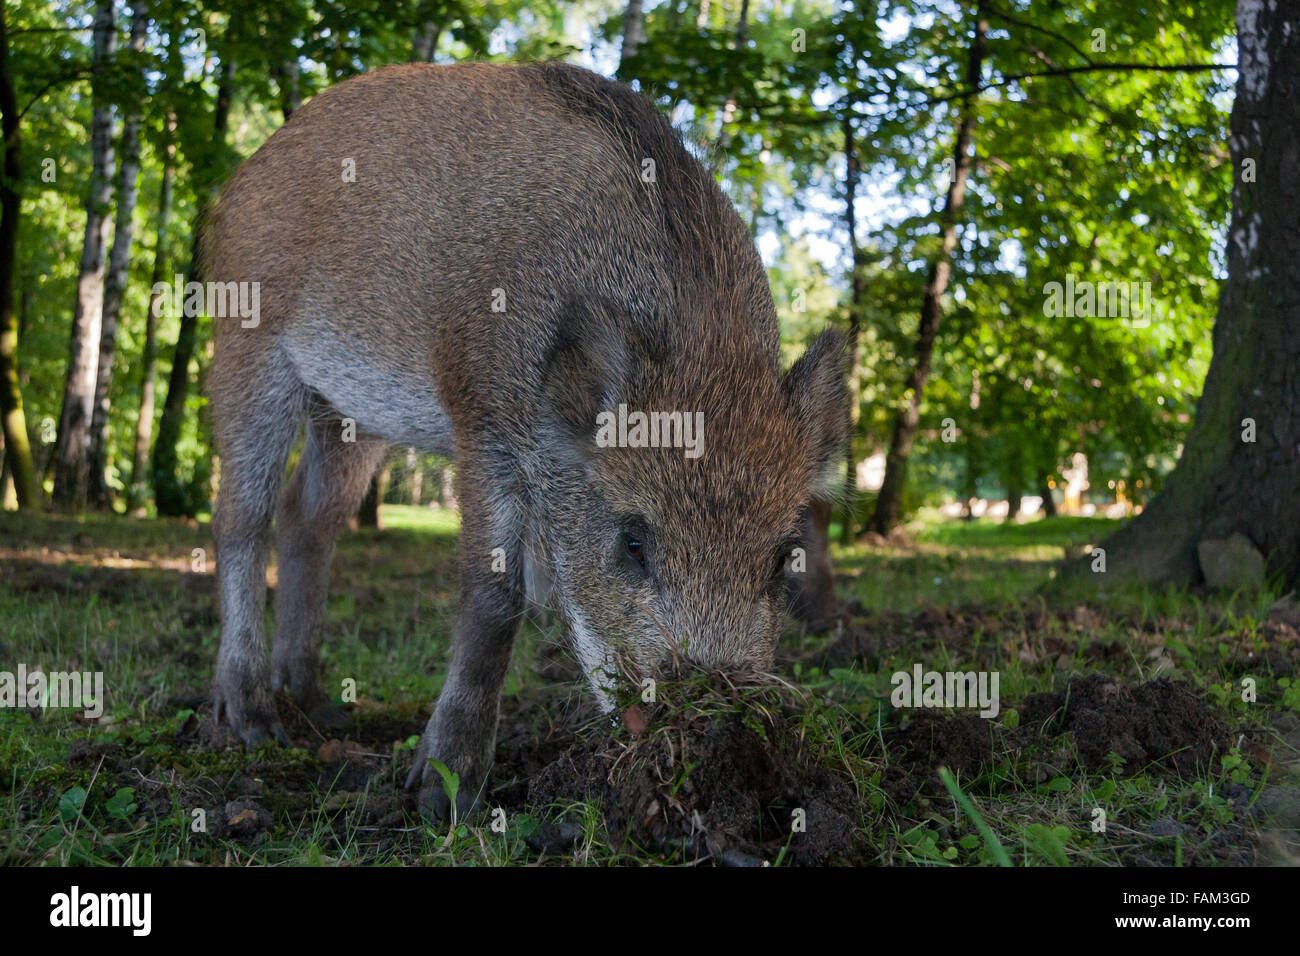 Young Wild Boar, Sus scrofa digging in ground Stock Photo